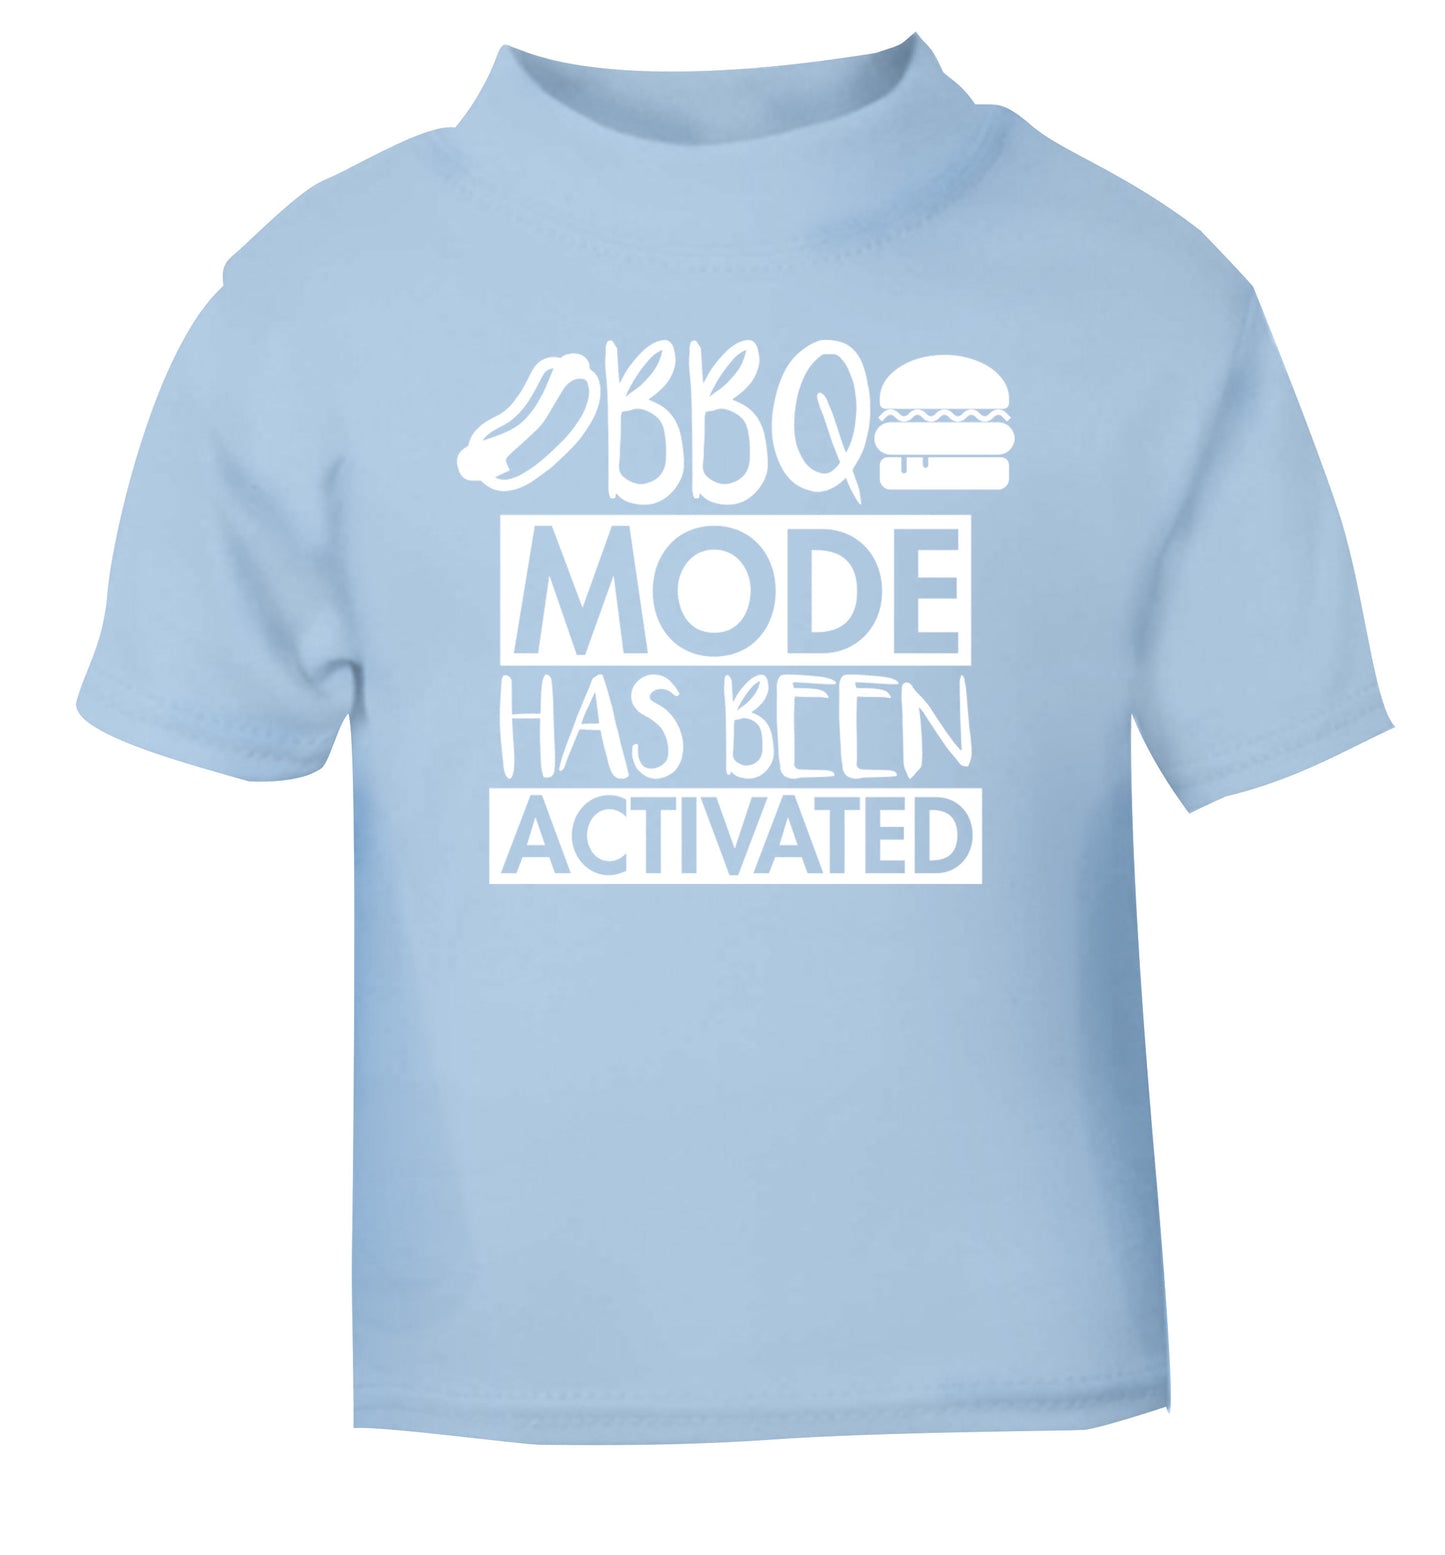 Bbq mode has been activated light blue Baby Toddler Tshirt 2 Years